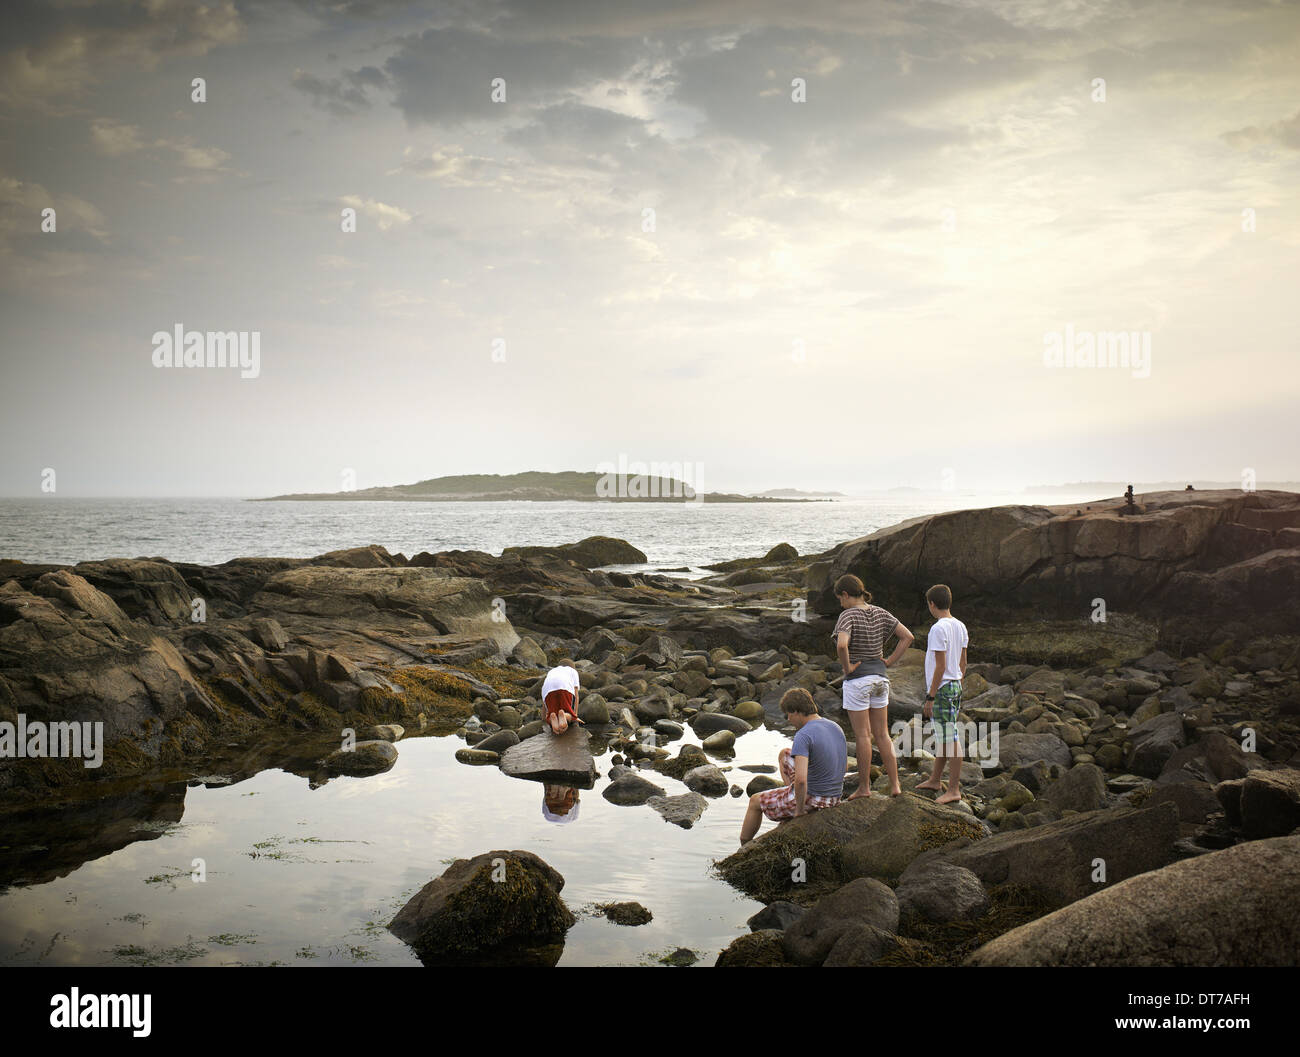 A group of people on the shore rock pooling and exploring the marine life View to an island offshore USA Stock Photo